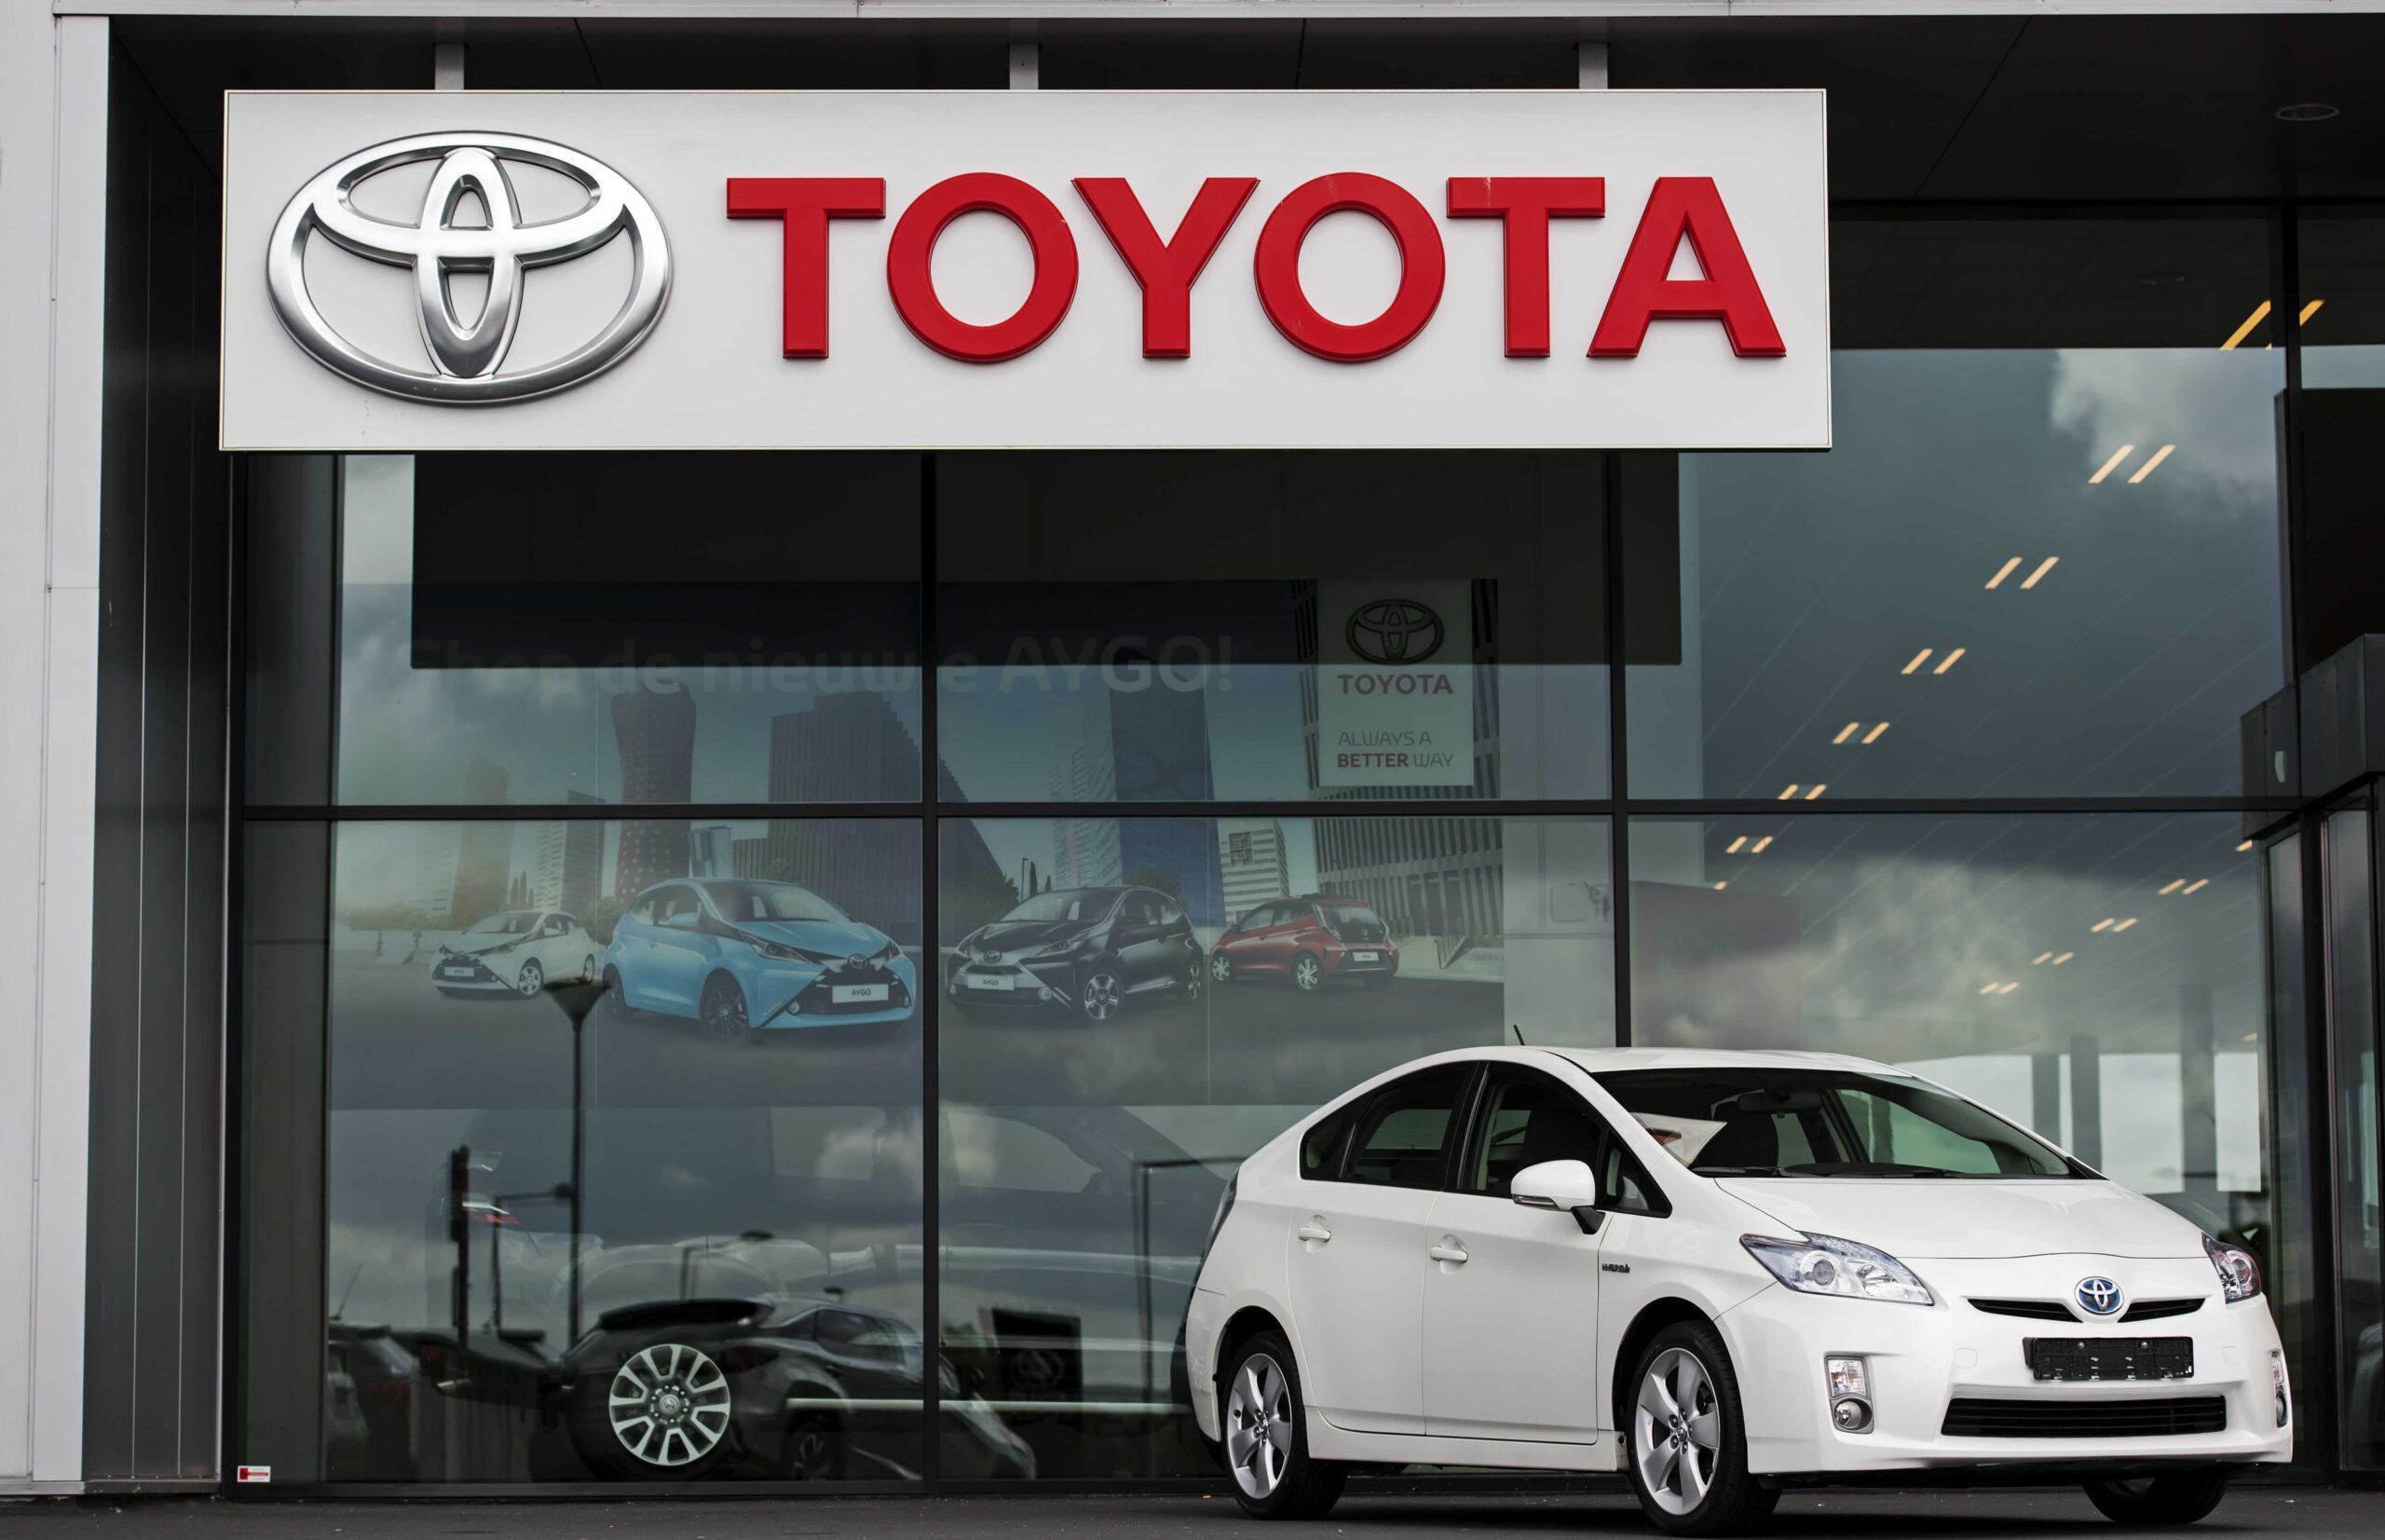 Toyota recalling 3.37 million vehicles over defects